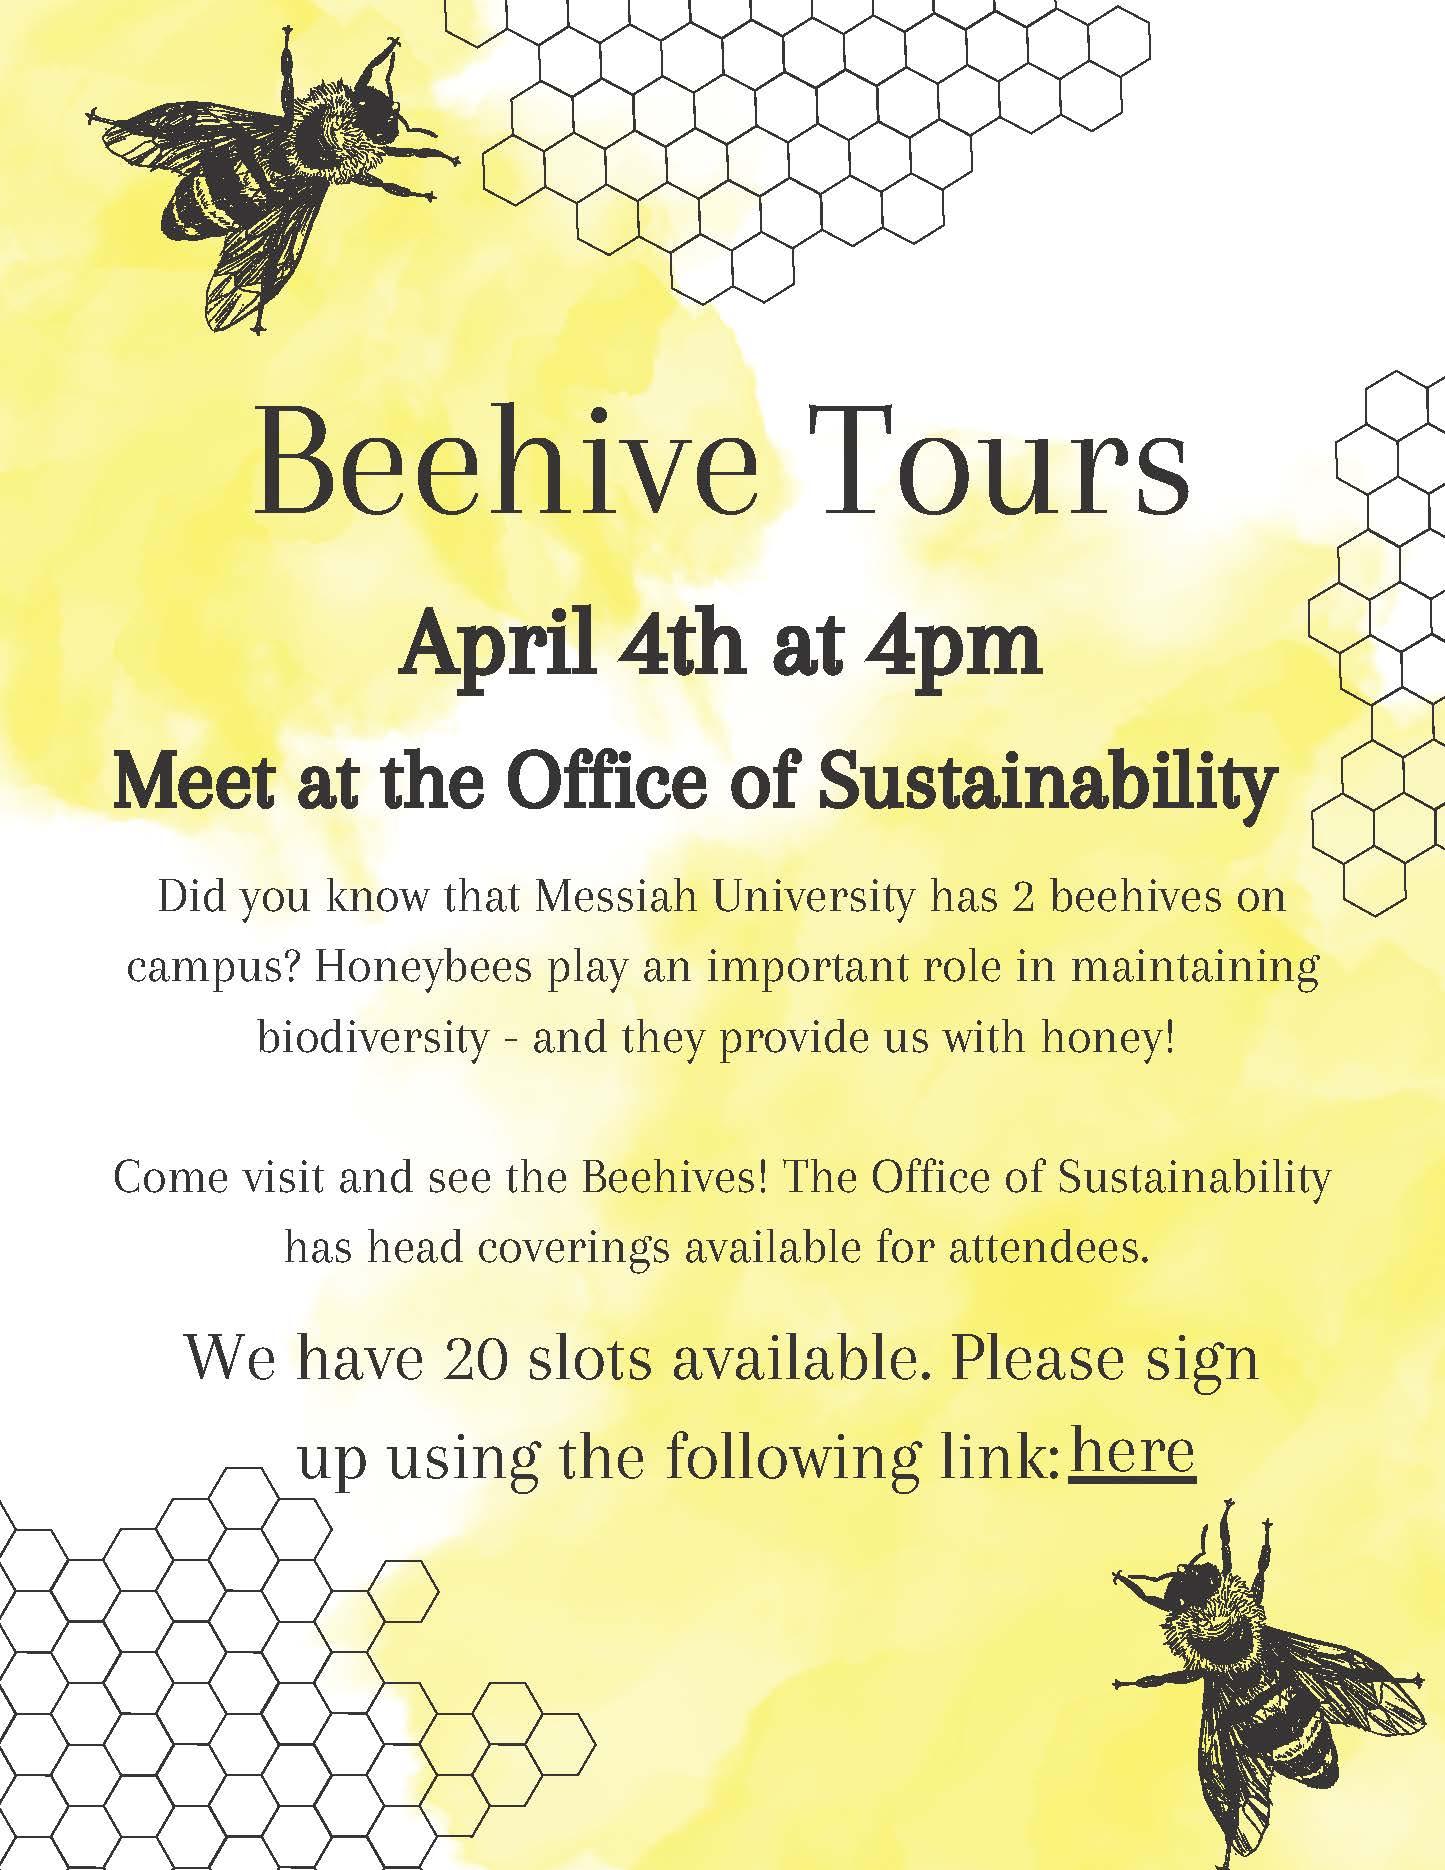 Bee hive tours picture